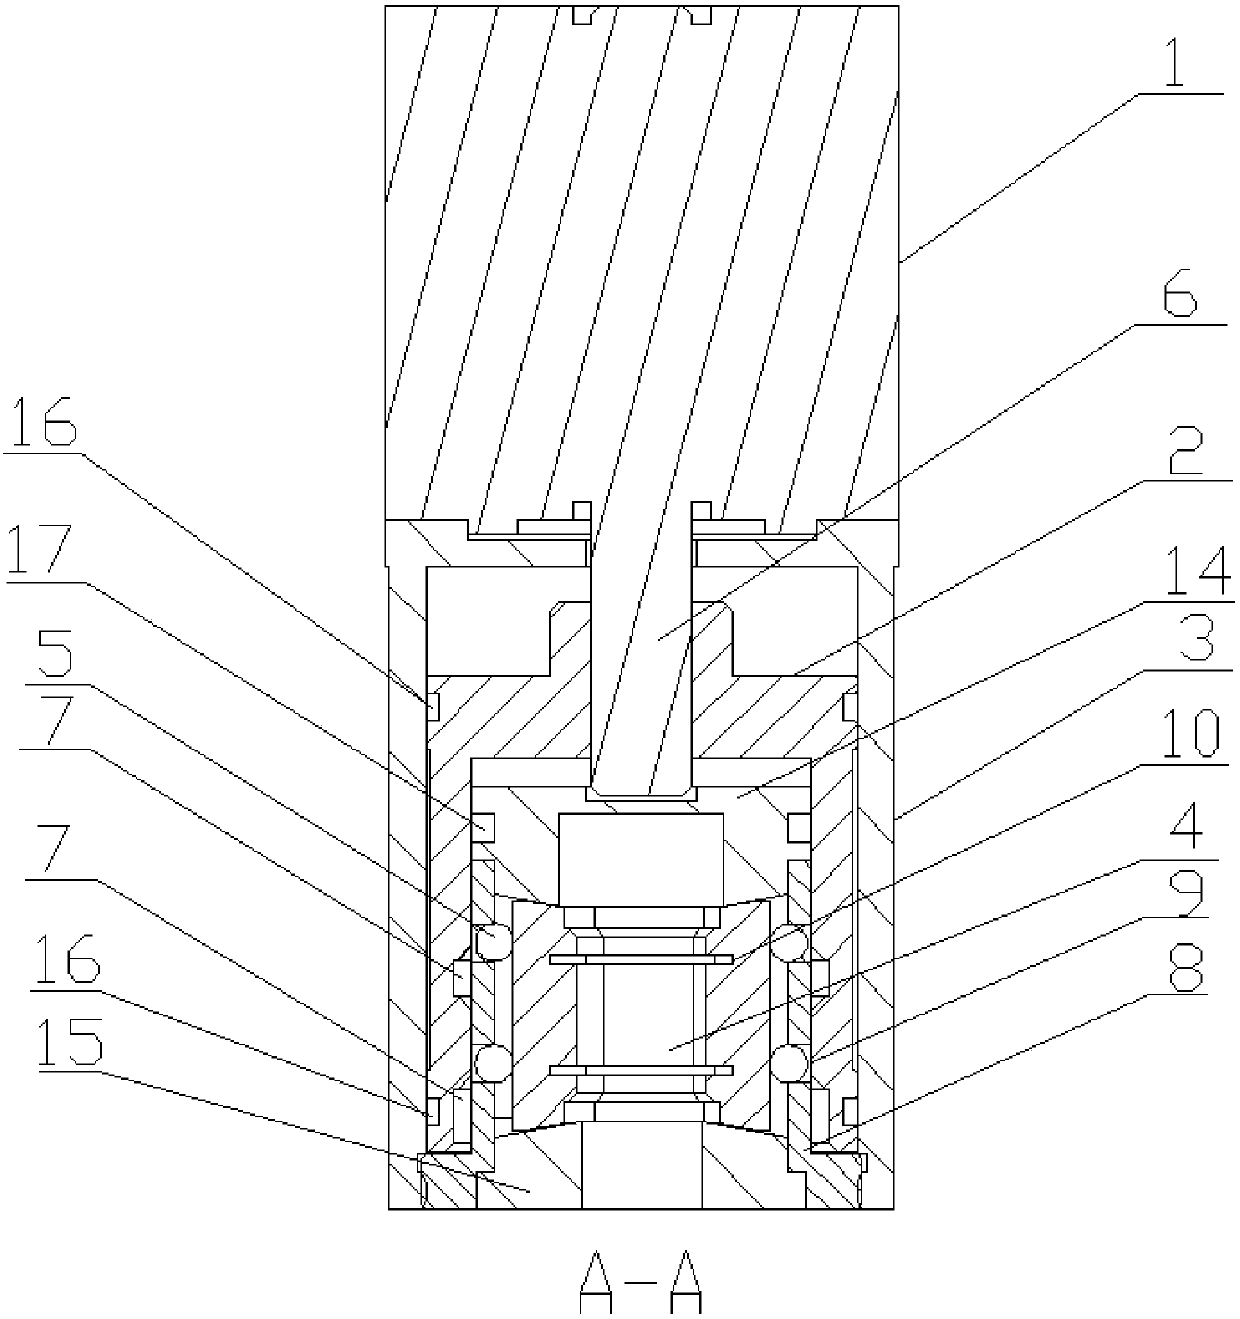 Electric self-unlocking separation nut and spacecraft